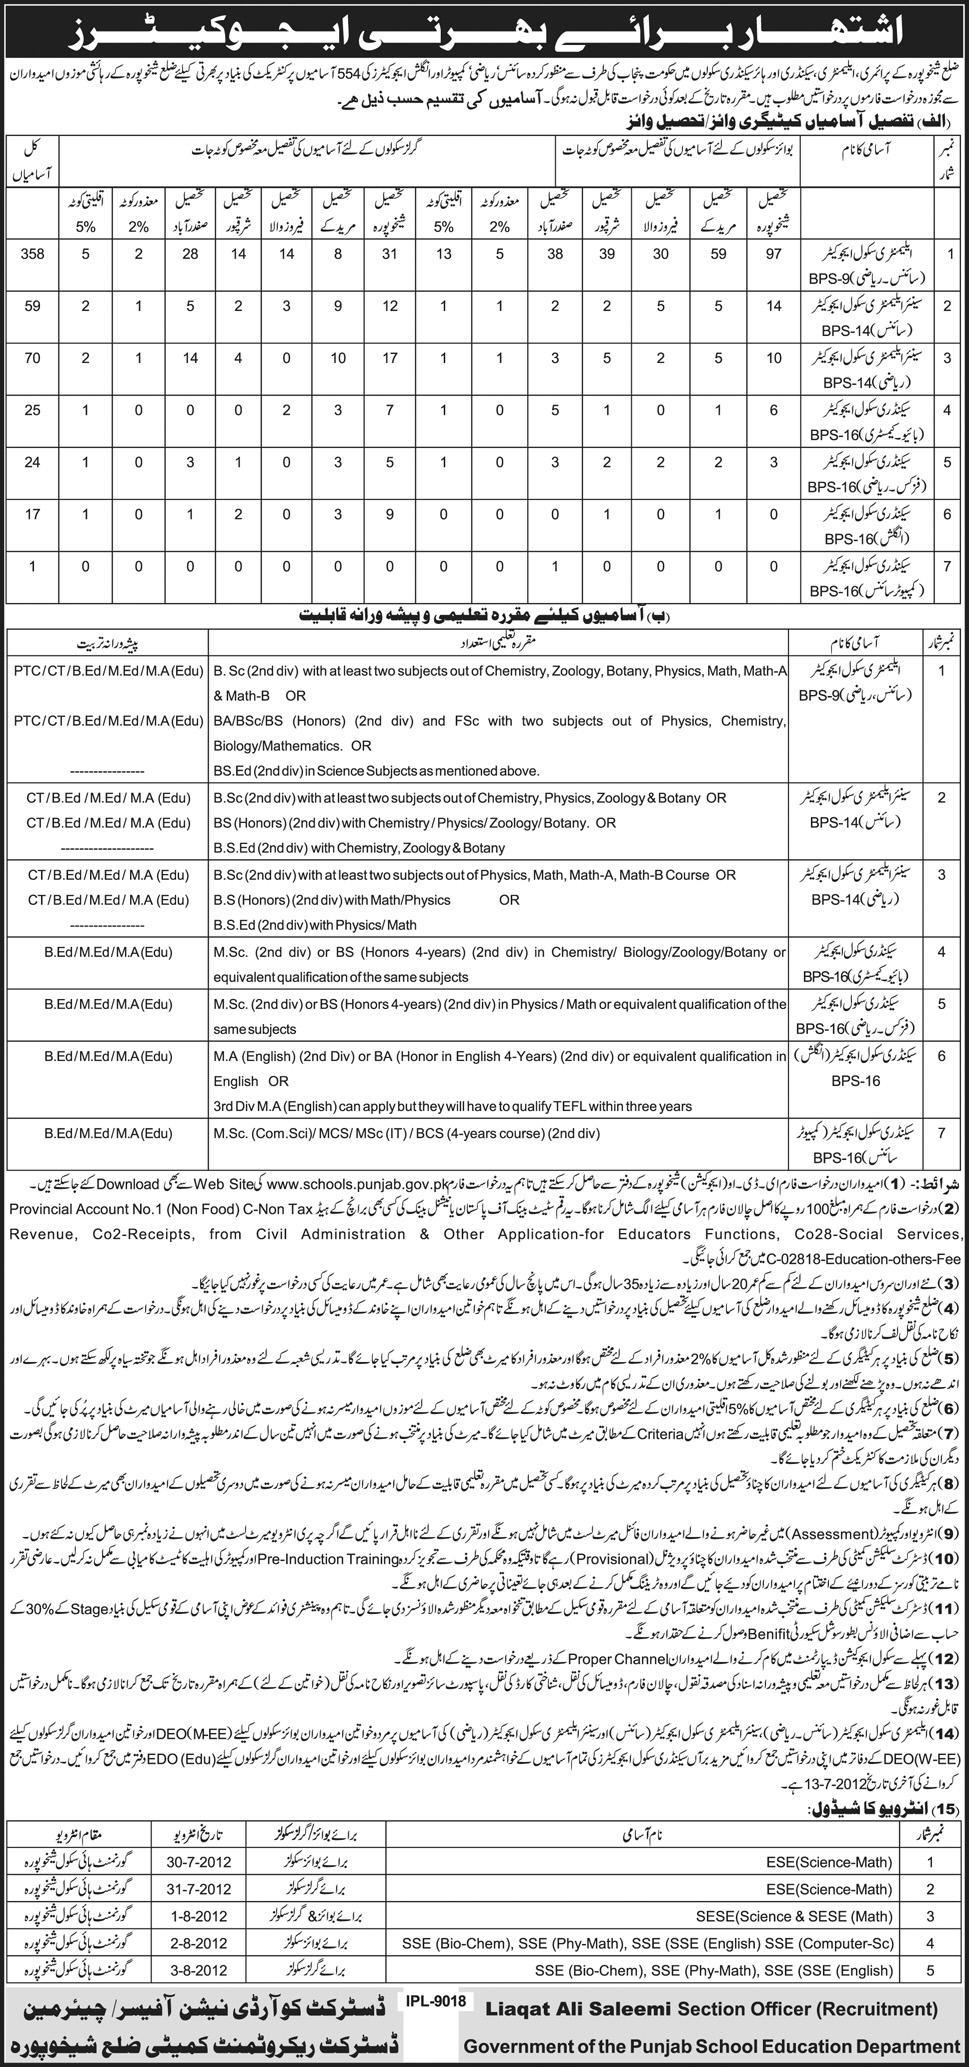 Teachers/Educators Required by Government of Punjab at Primary, Elementary, Secondary and Higher Secondary Schools (Sheikhupura District) (554 Vacancies) (Govt. Job)